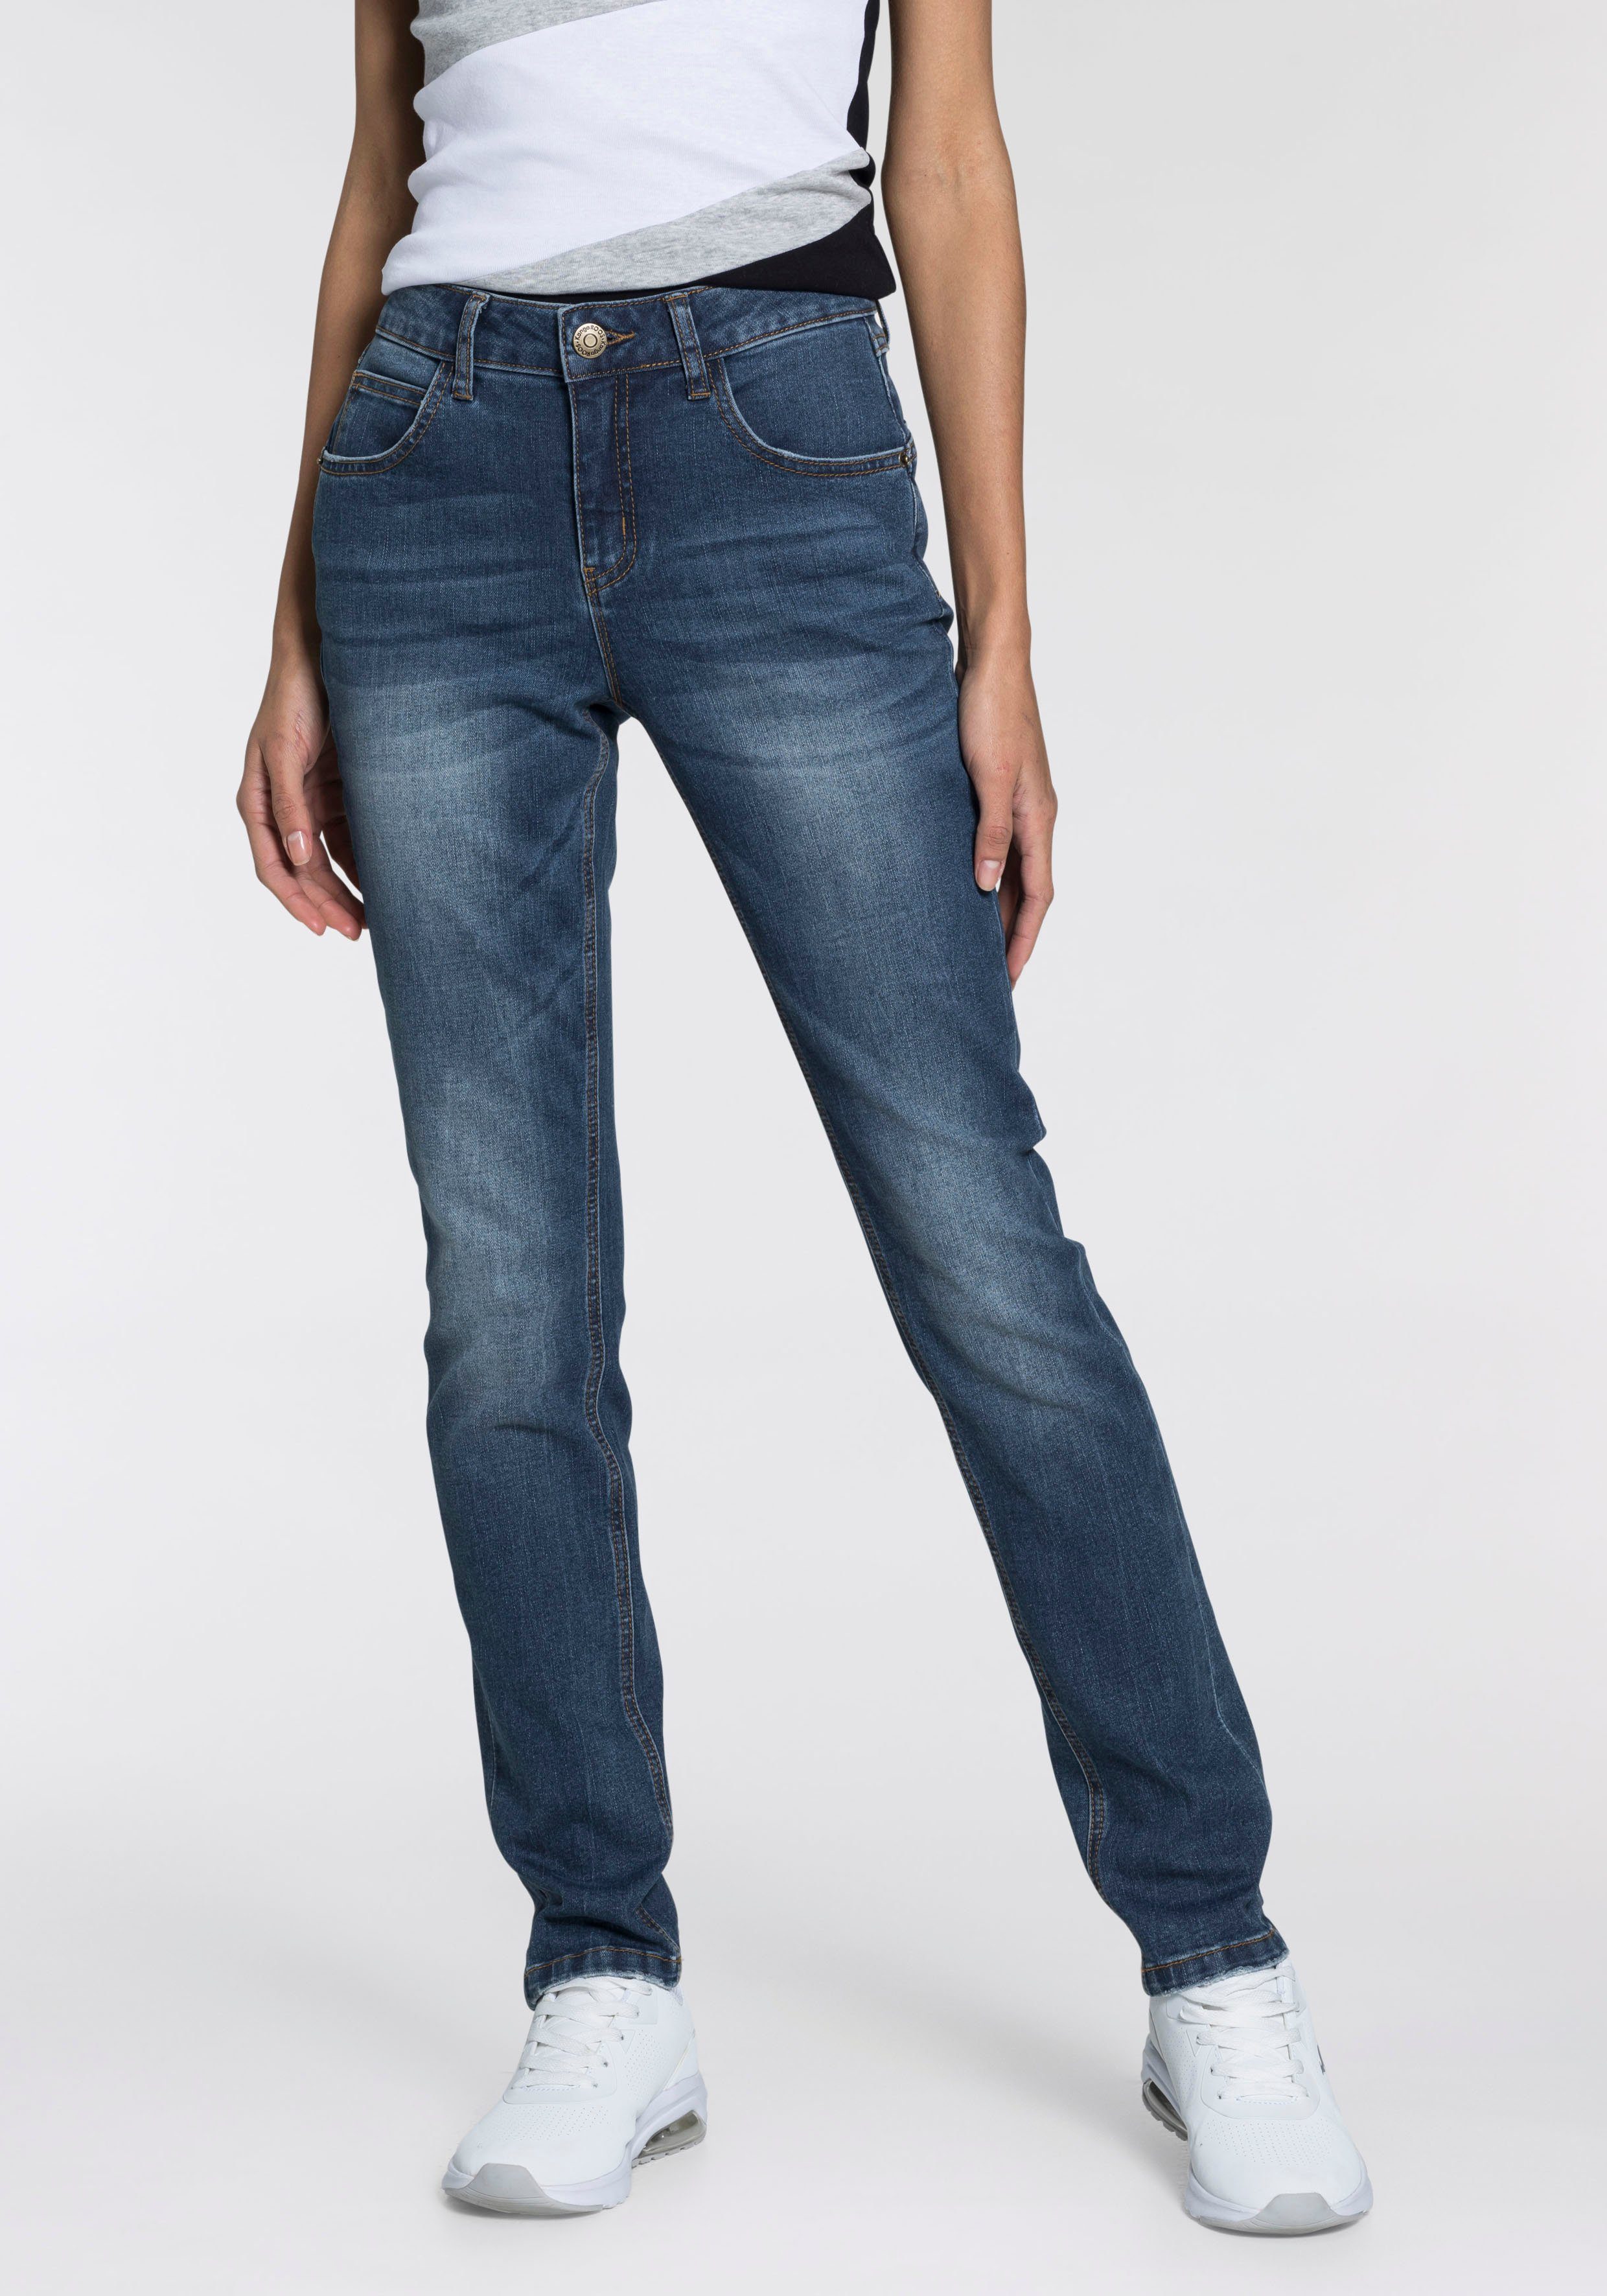 WAIST HIGH KangaROOS RELAX-FIT Relax-fit-Jeans